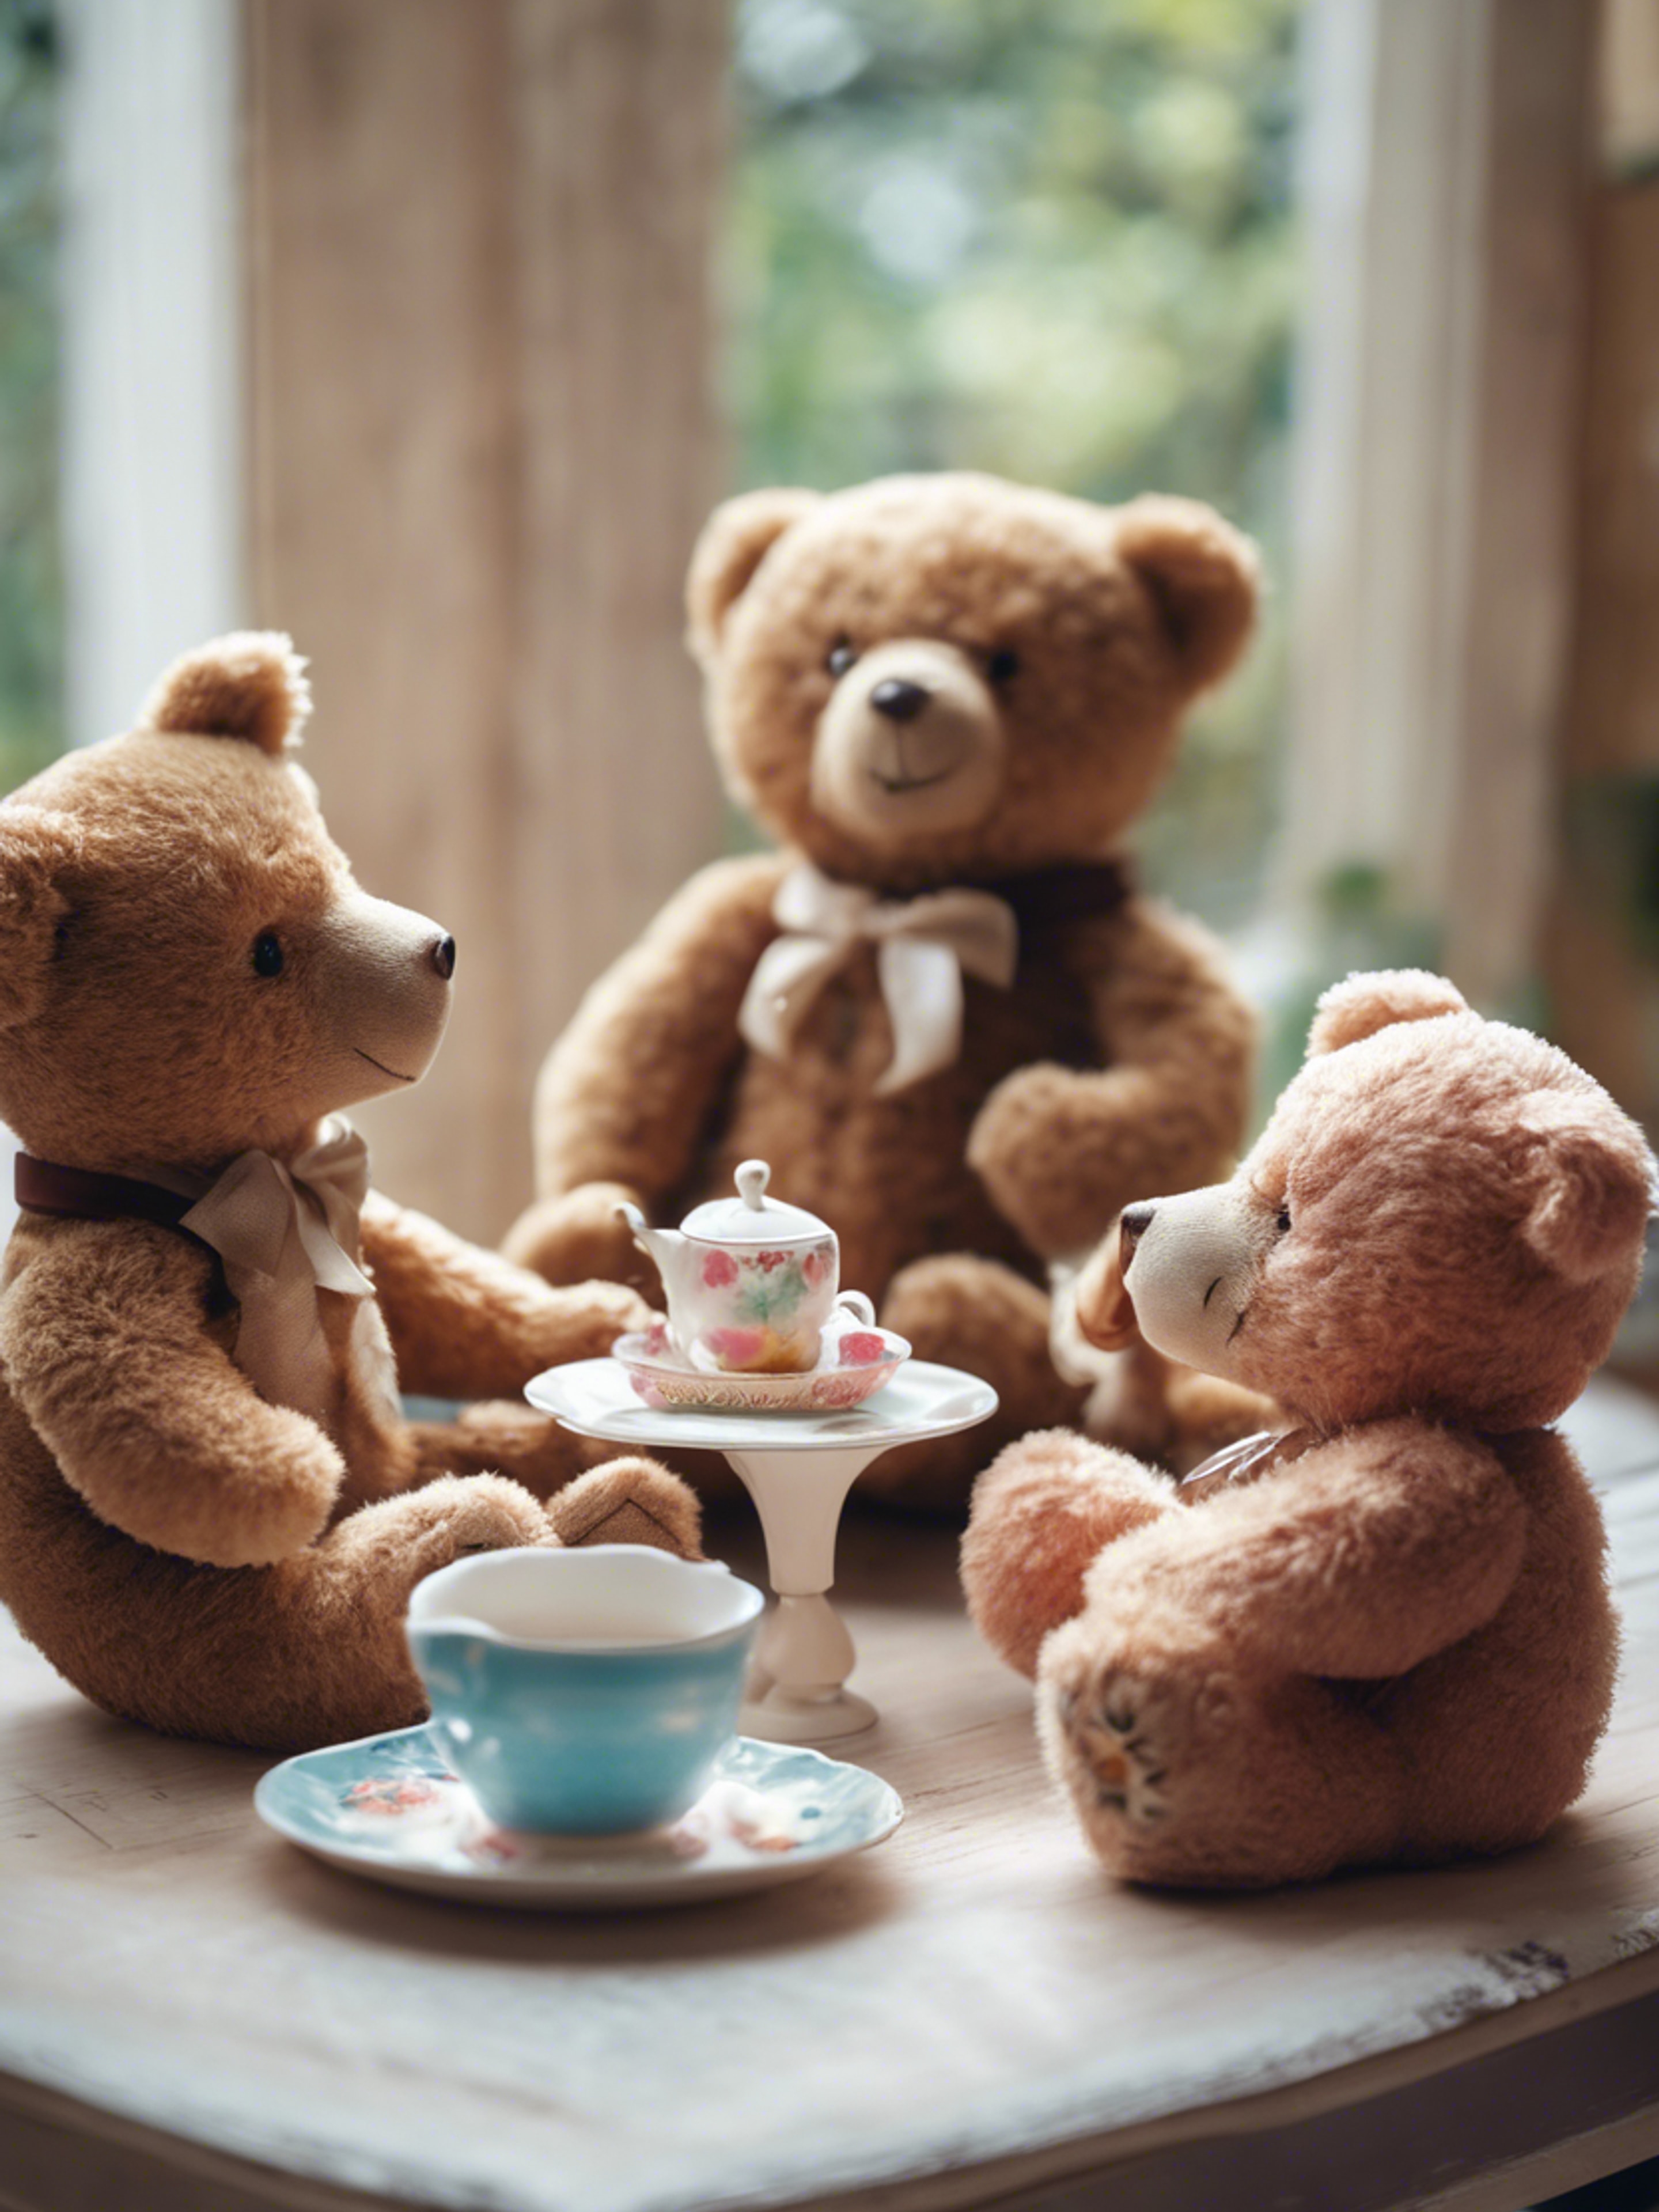 A group of teddy bears having a playful tea party in a child's room.壁紙[5c3b9dbbb3984ccebf50]